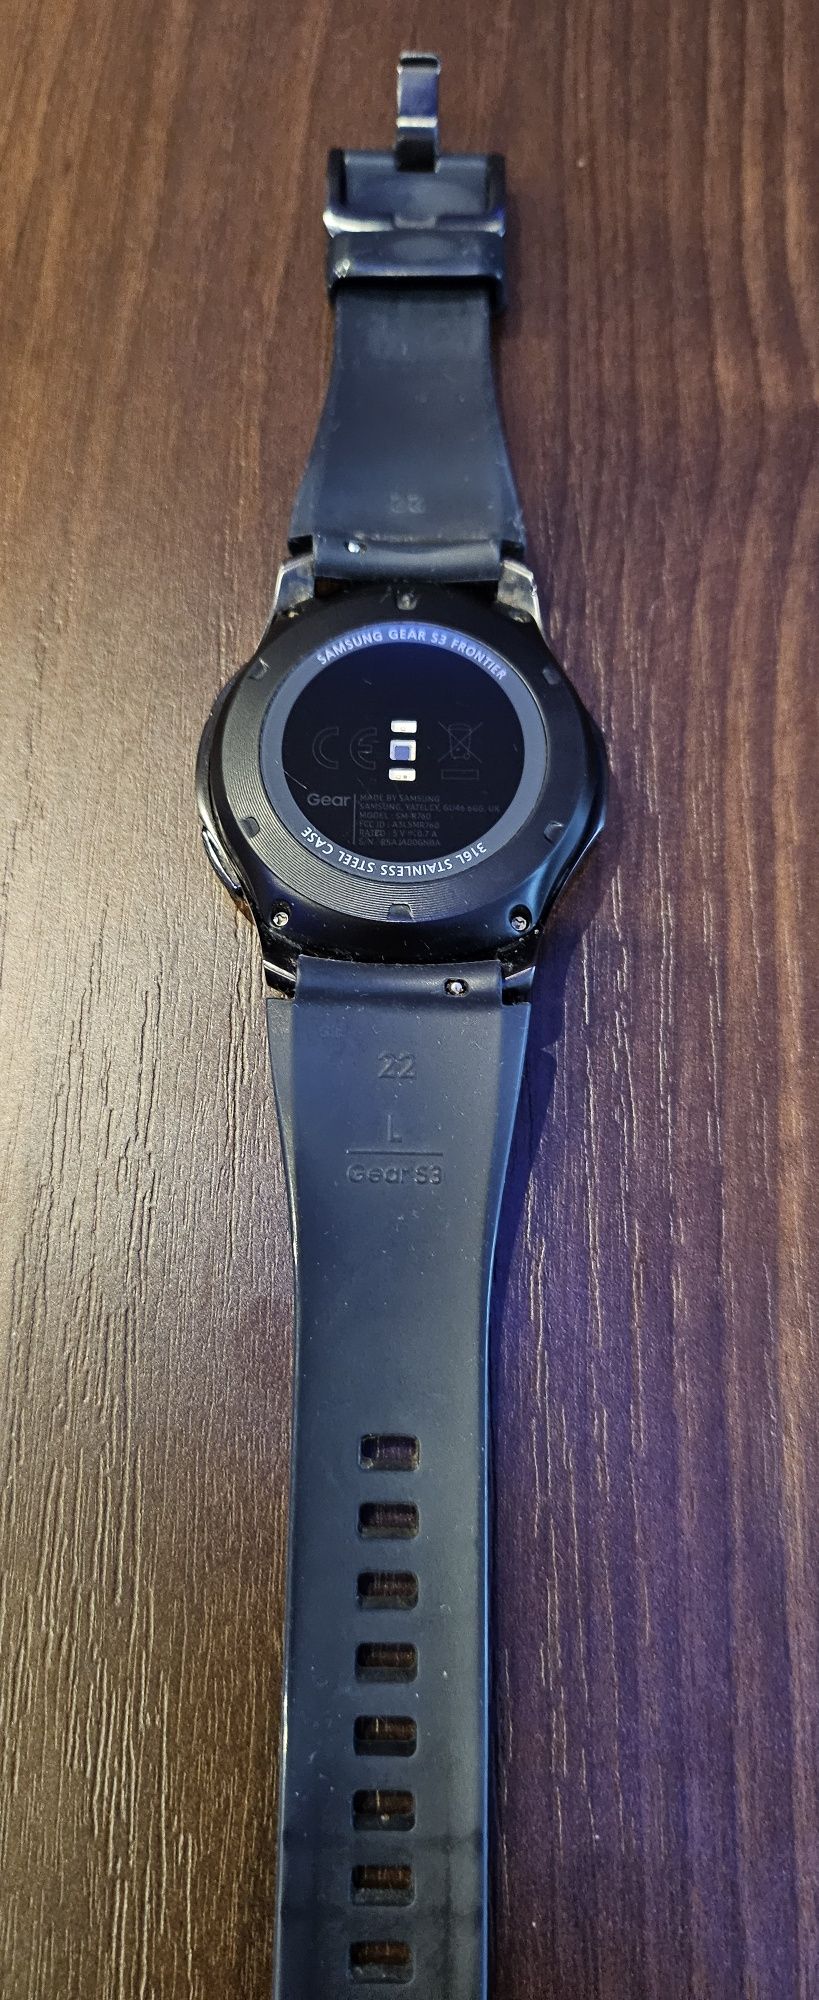 Samsung Gear S3 Frontier TYCHY